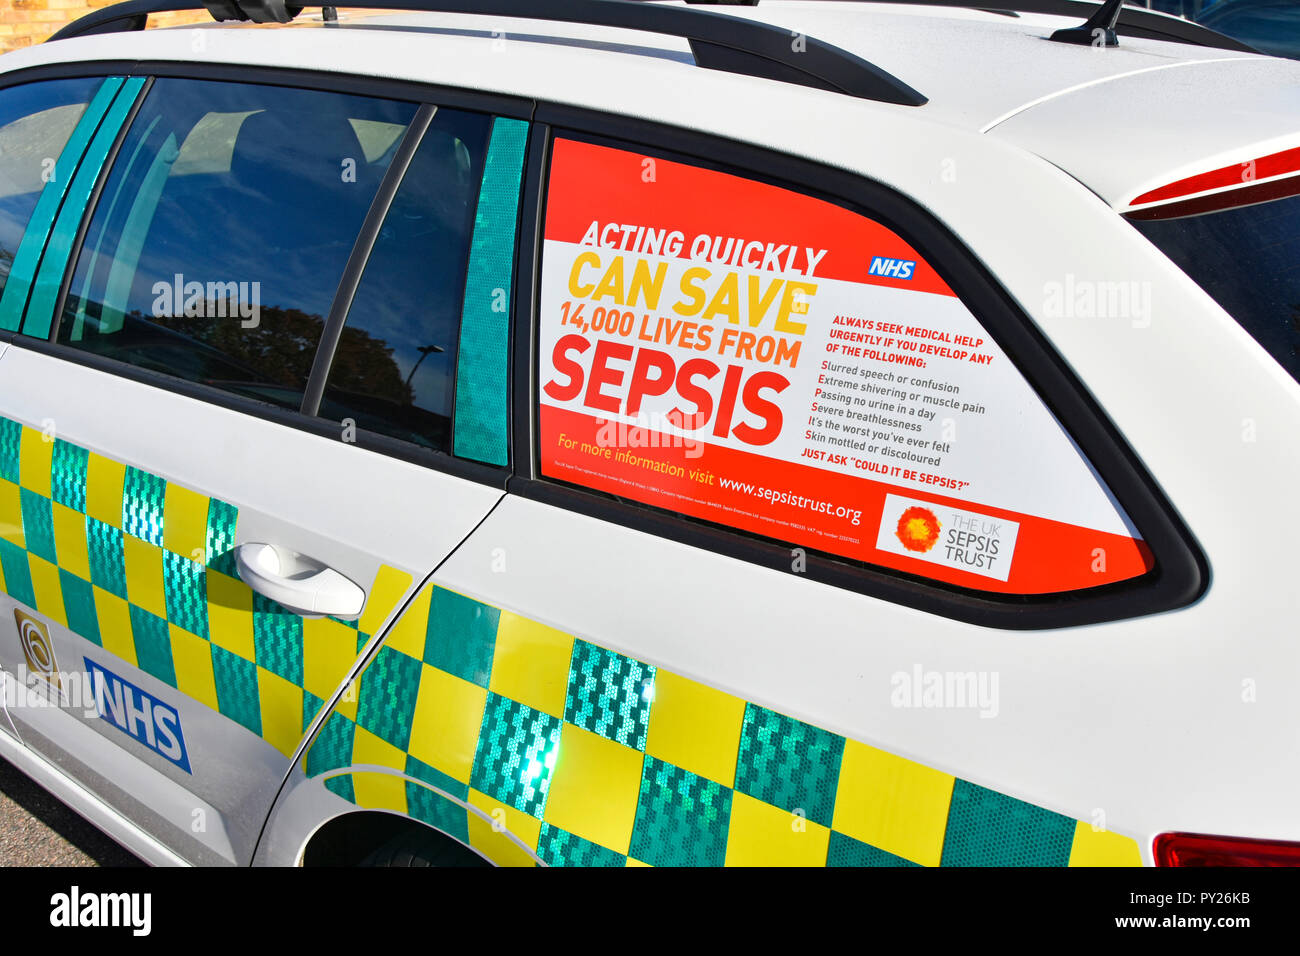 Healthcare awareness poster advert promotion saving lives from Sepsis  NHS doctors car window in National Health service hospital Essex England UK Stock Photo